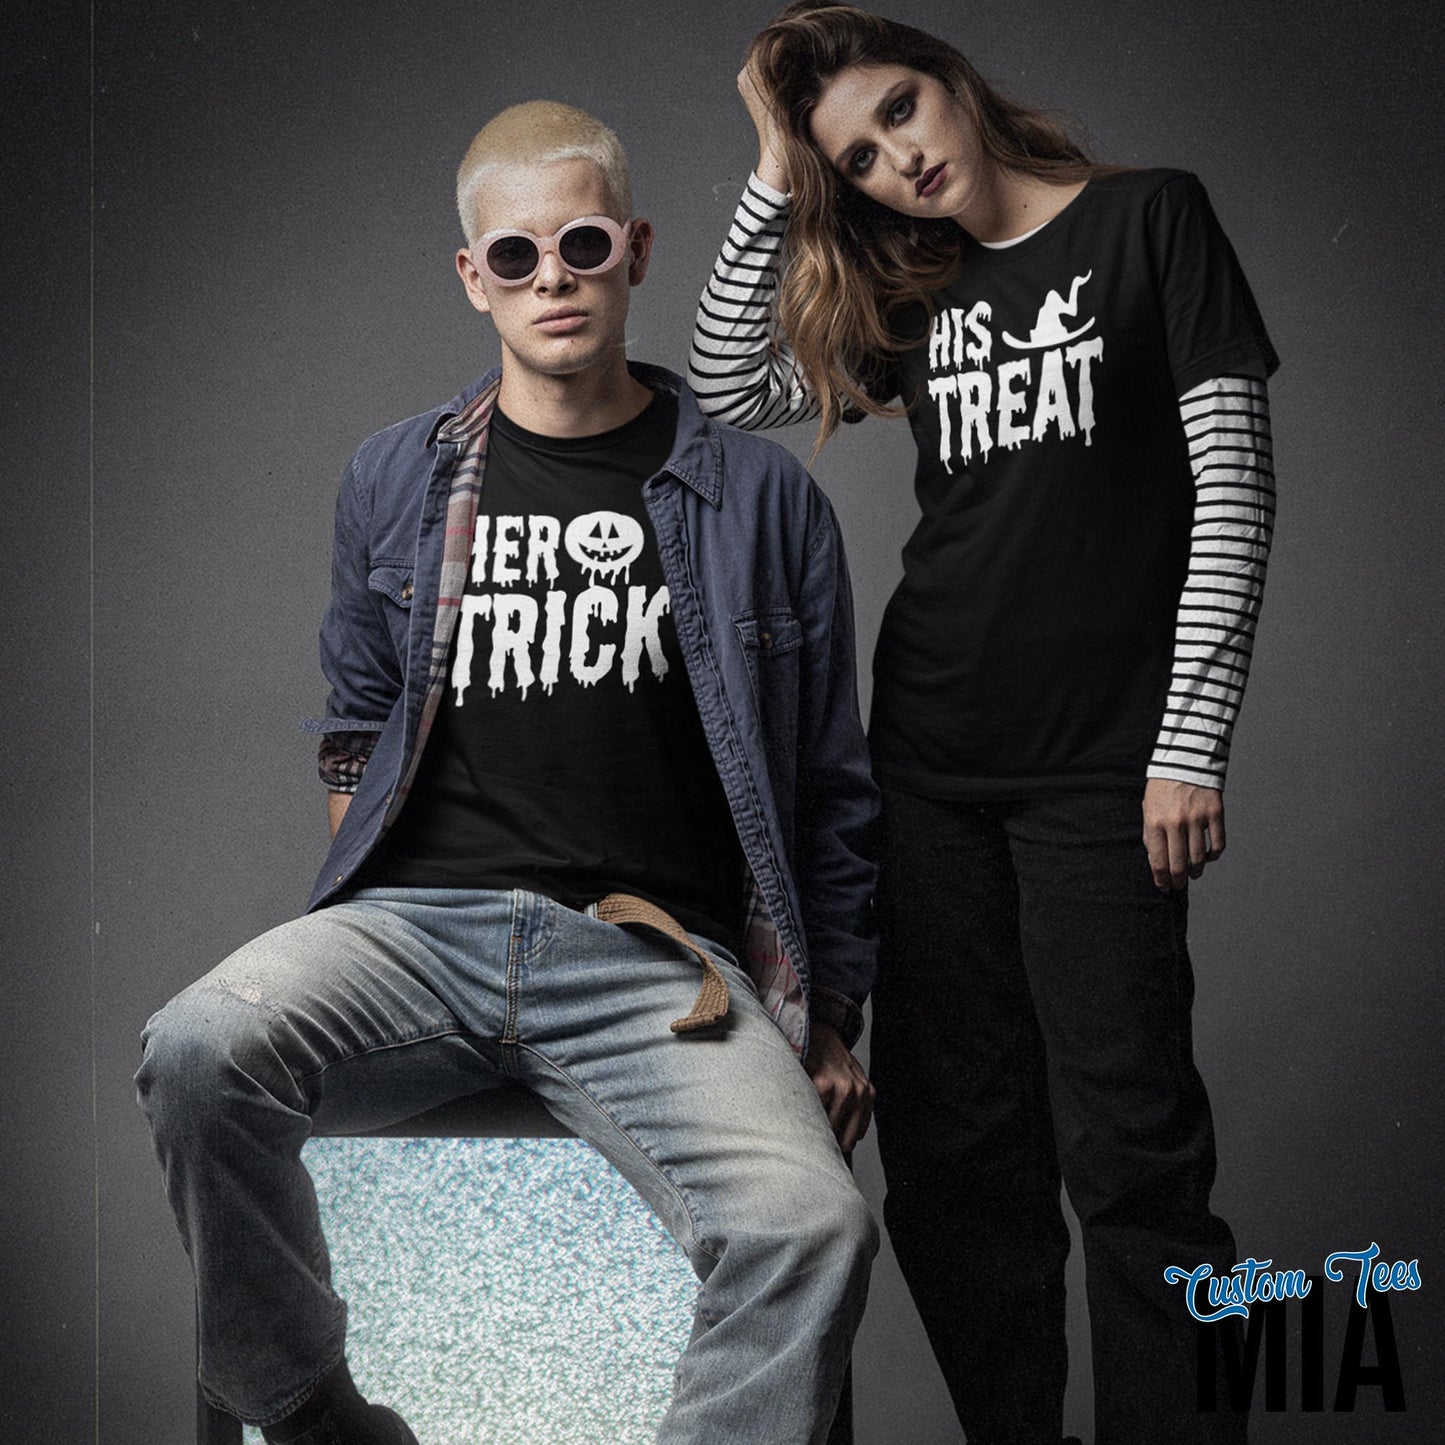 Her Trick, His Treat Halloween Couples Shirts